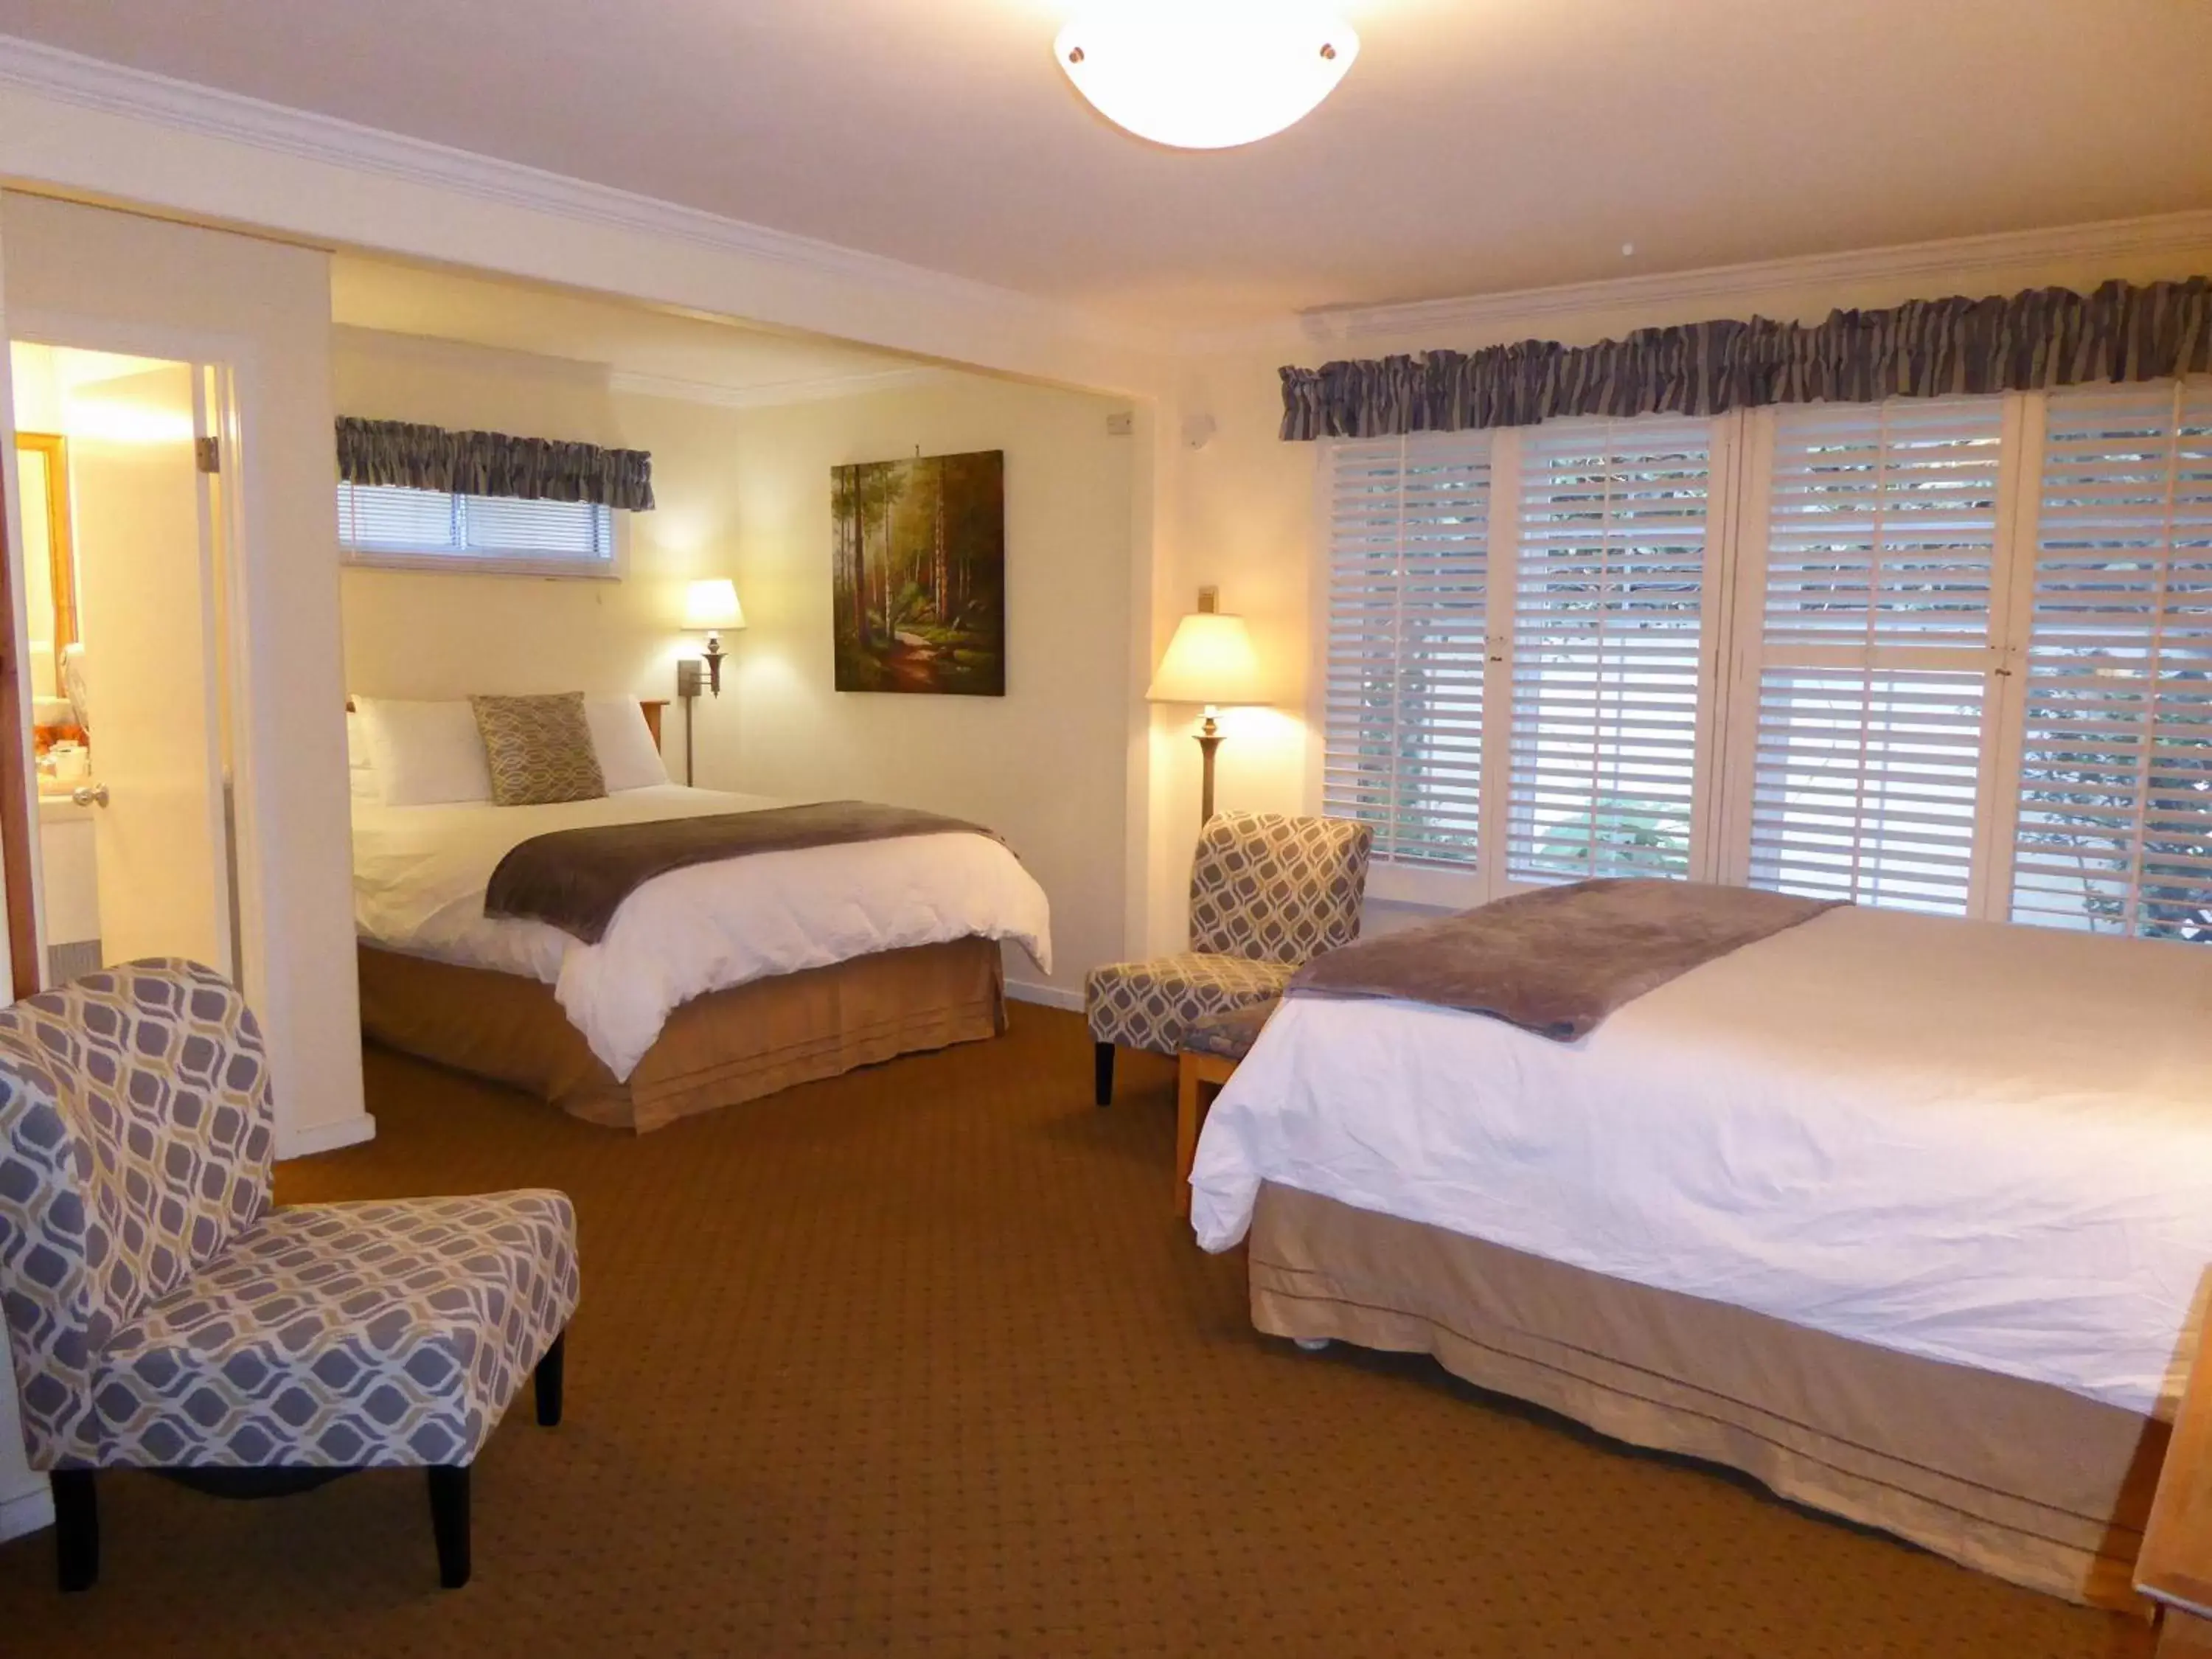 Windsor Room with Parking in Briarwood Inn